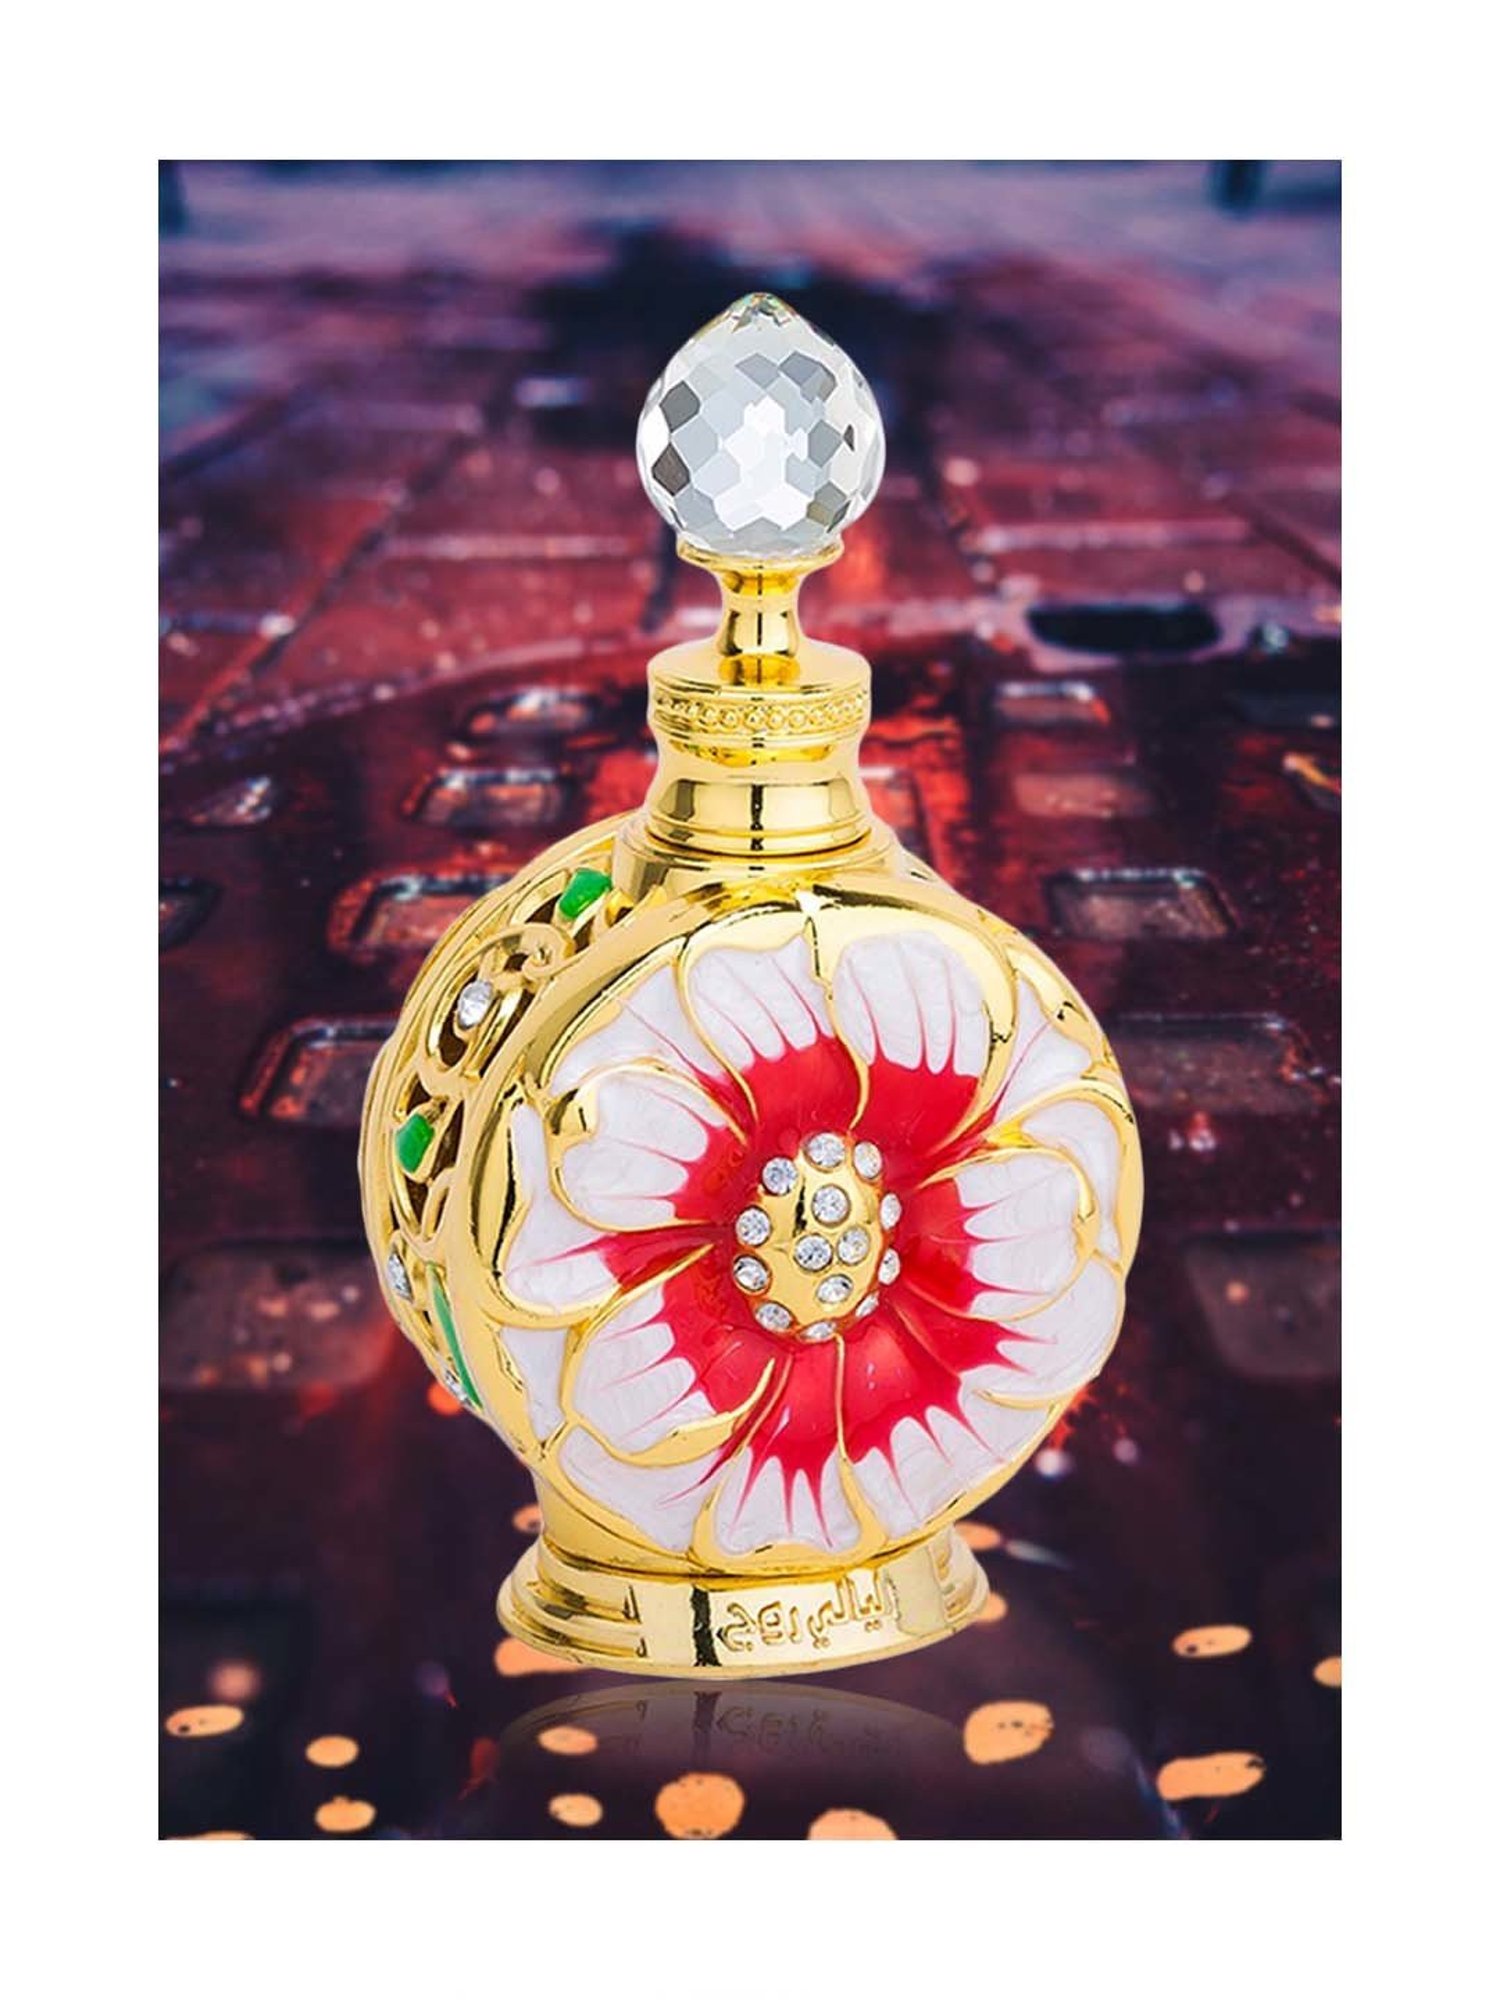 Buy Swiss Arabian Layali Rouge 996 Concentrated Perfume Oil - 15 ml Online  At Best Price @ Tata CLiQ